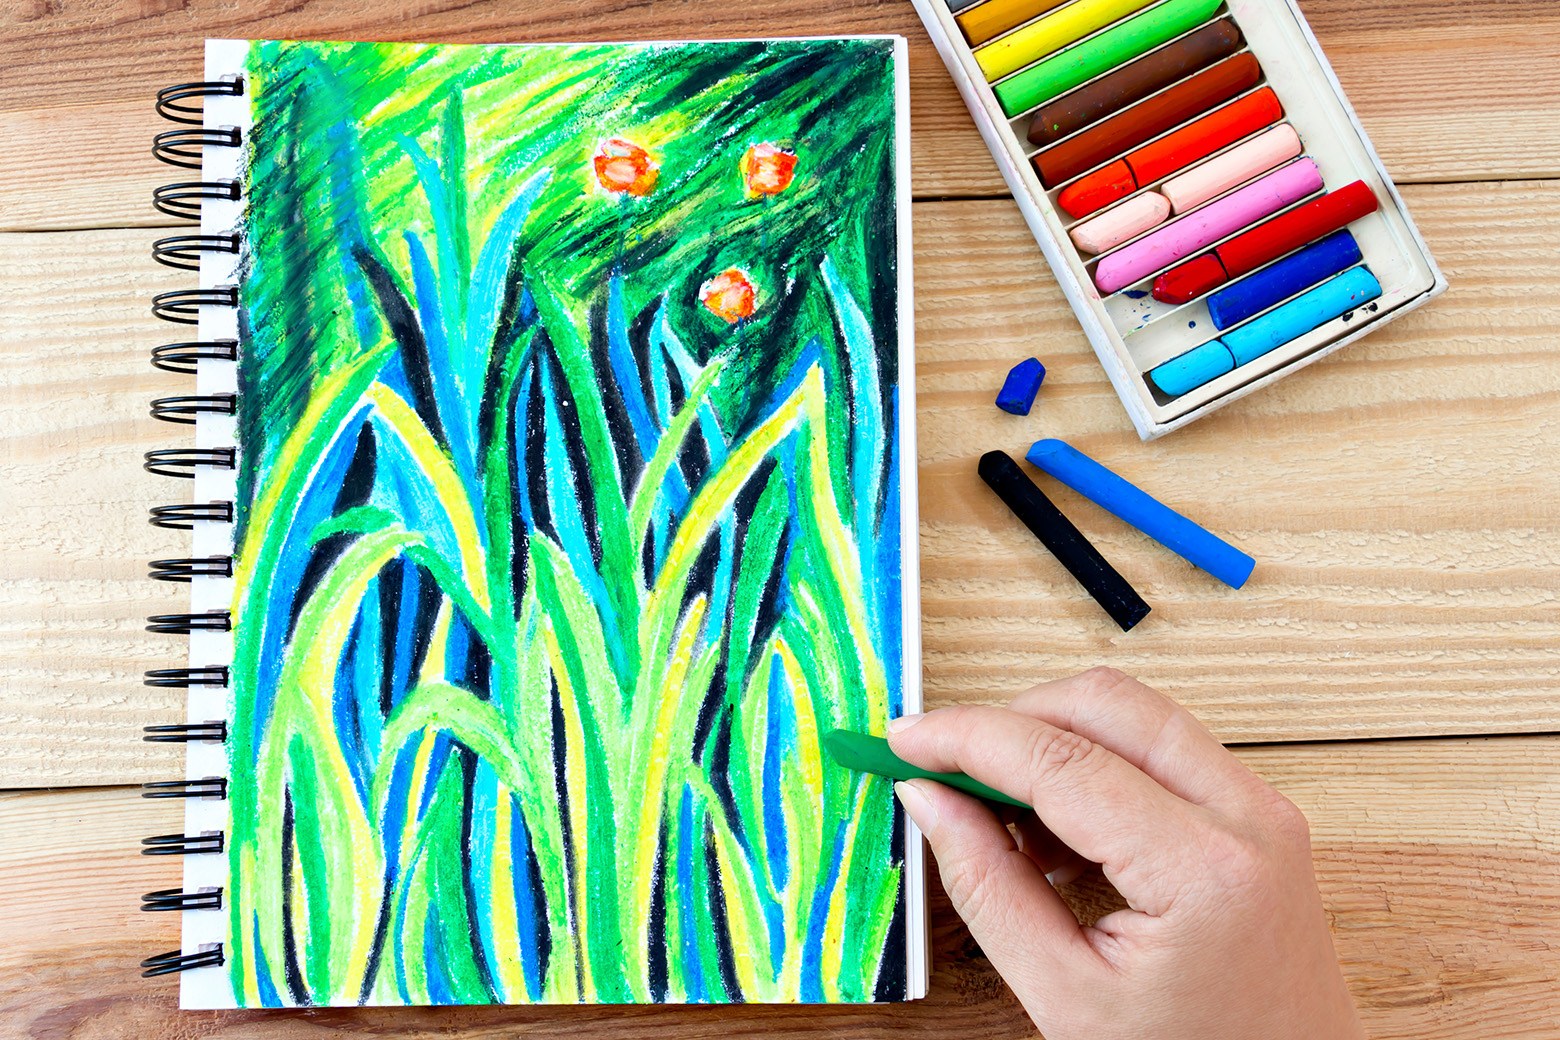 Best oil pastels Drawing for beginners: Easy oil pastel Forest Scenery  Drawing - YouTube